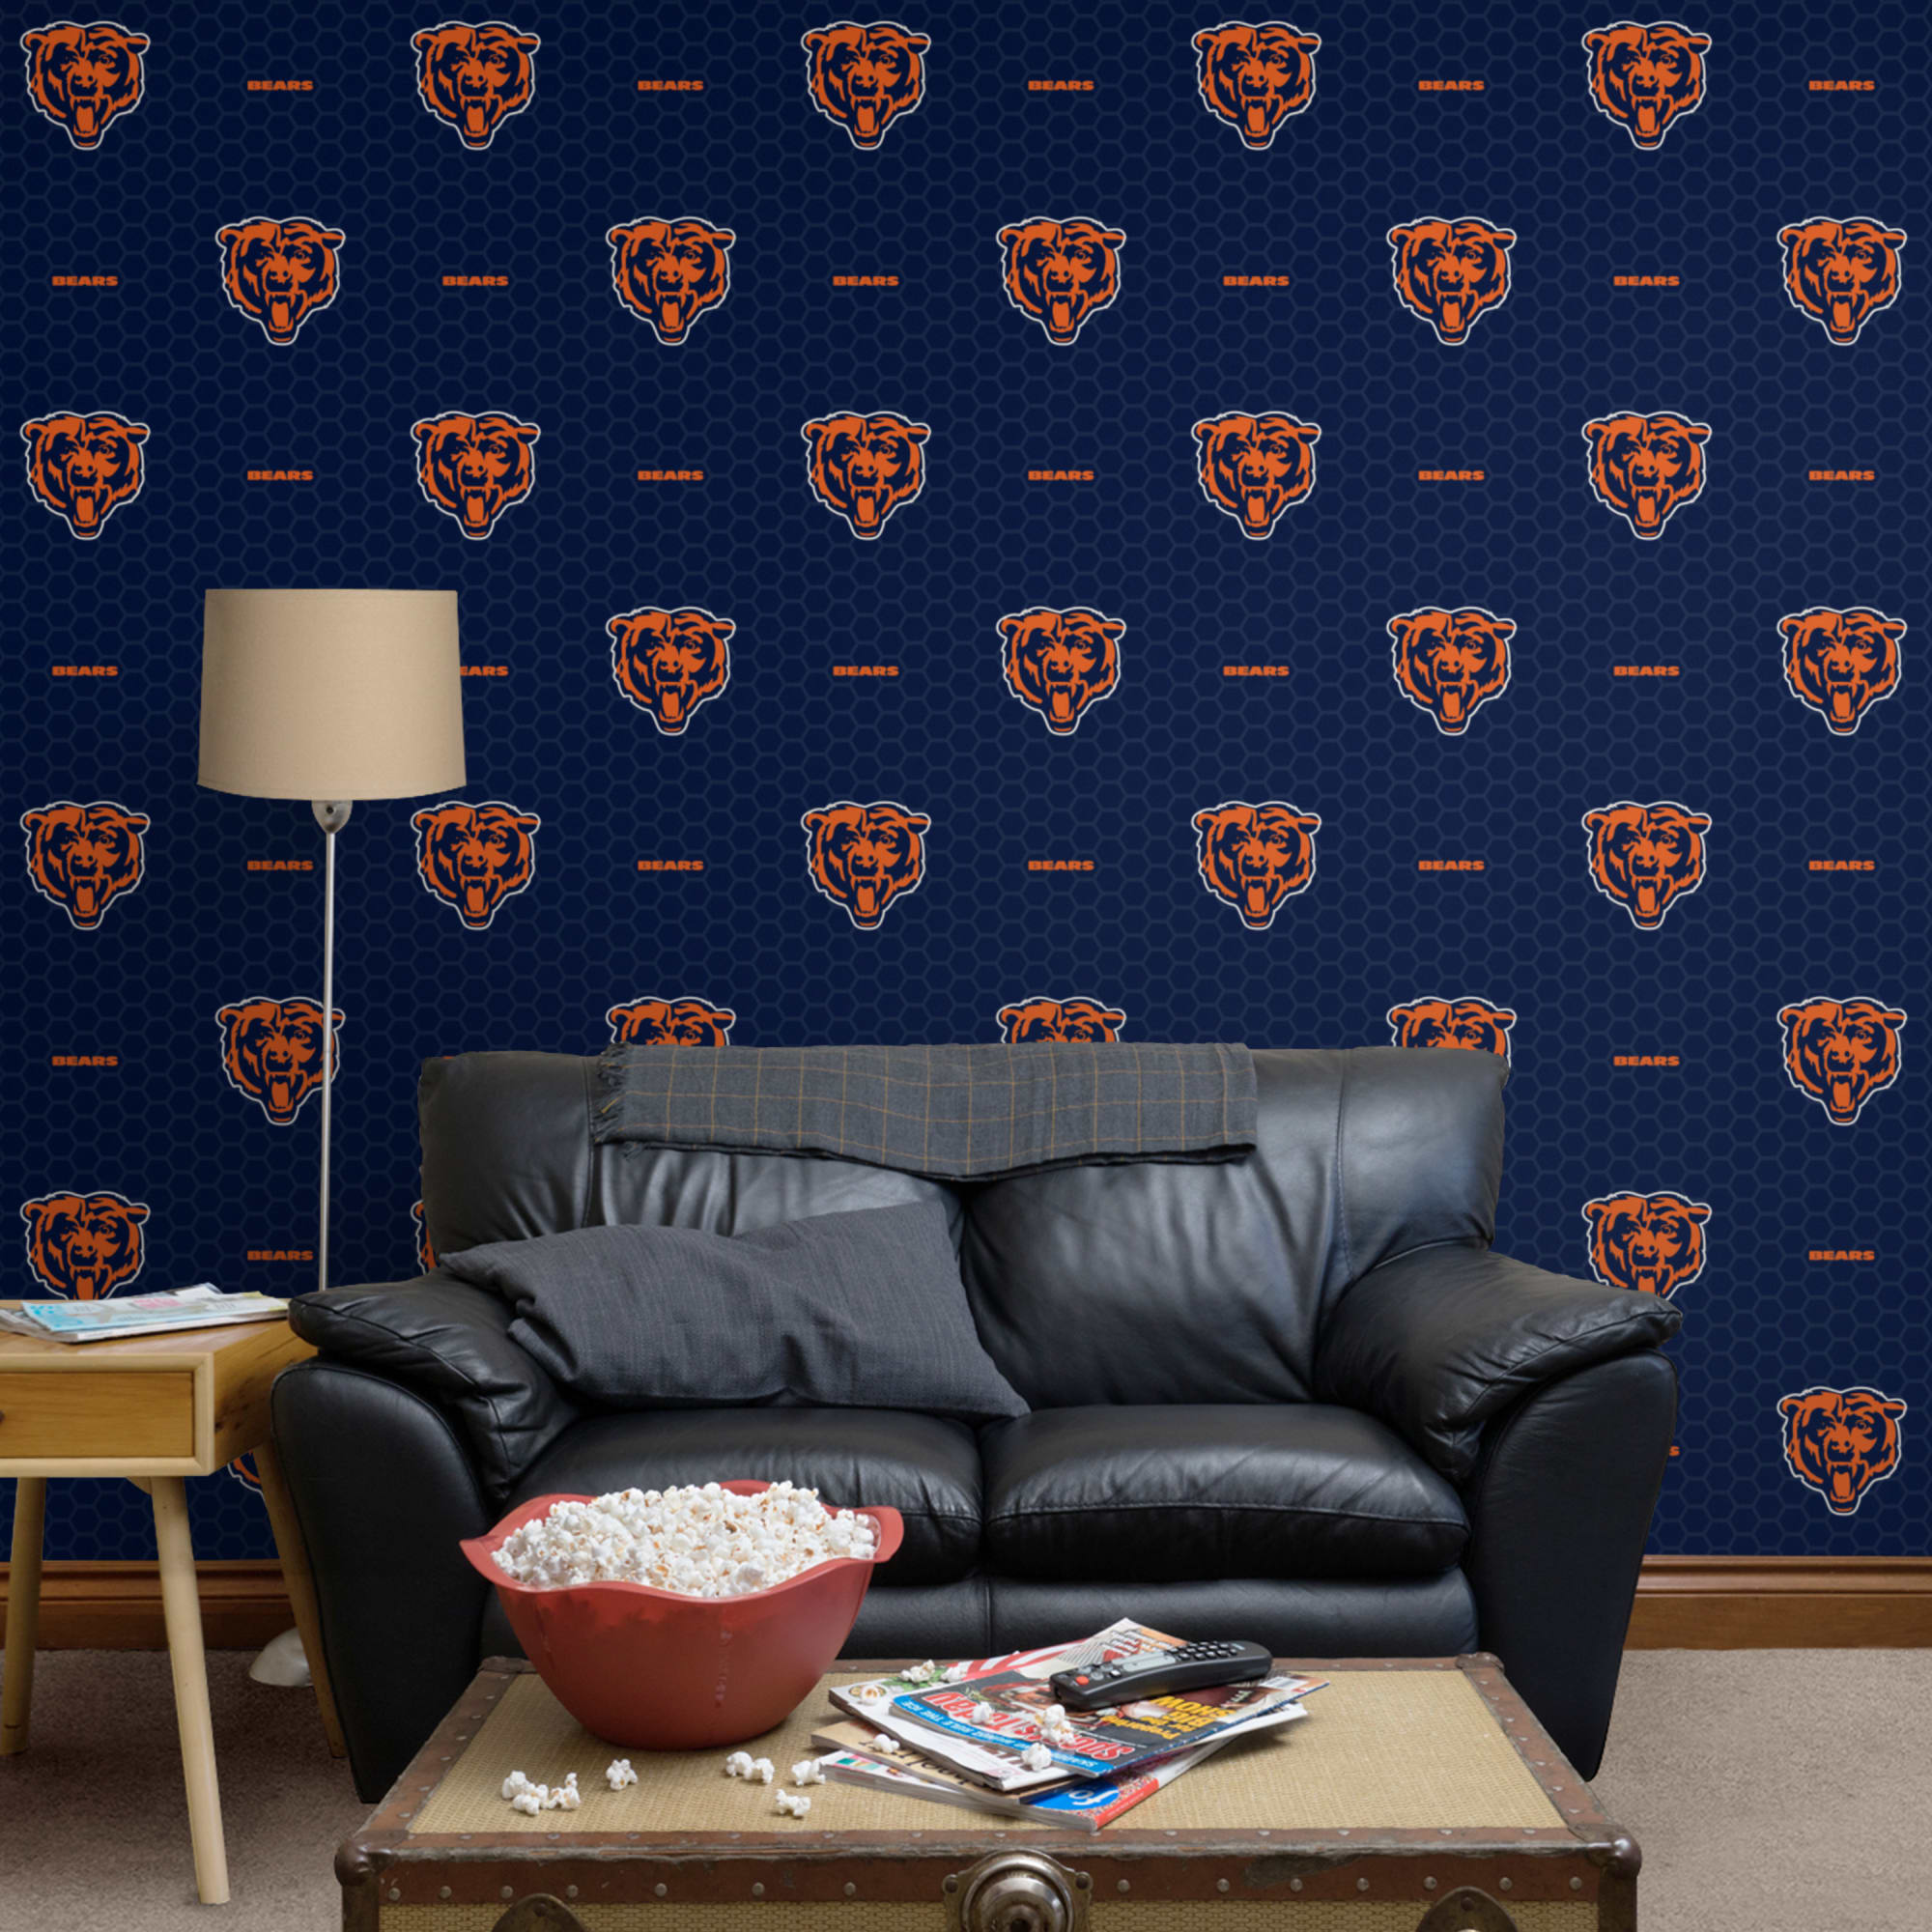 Chicago Bears: Logo Pattern - Officially Licensed NFL Removable Wallpaper 12" x 12" Sample by Fathead | 100% Vinyl